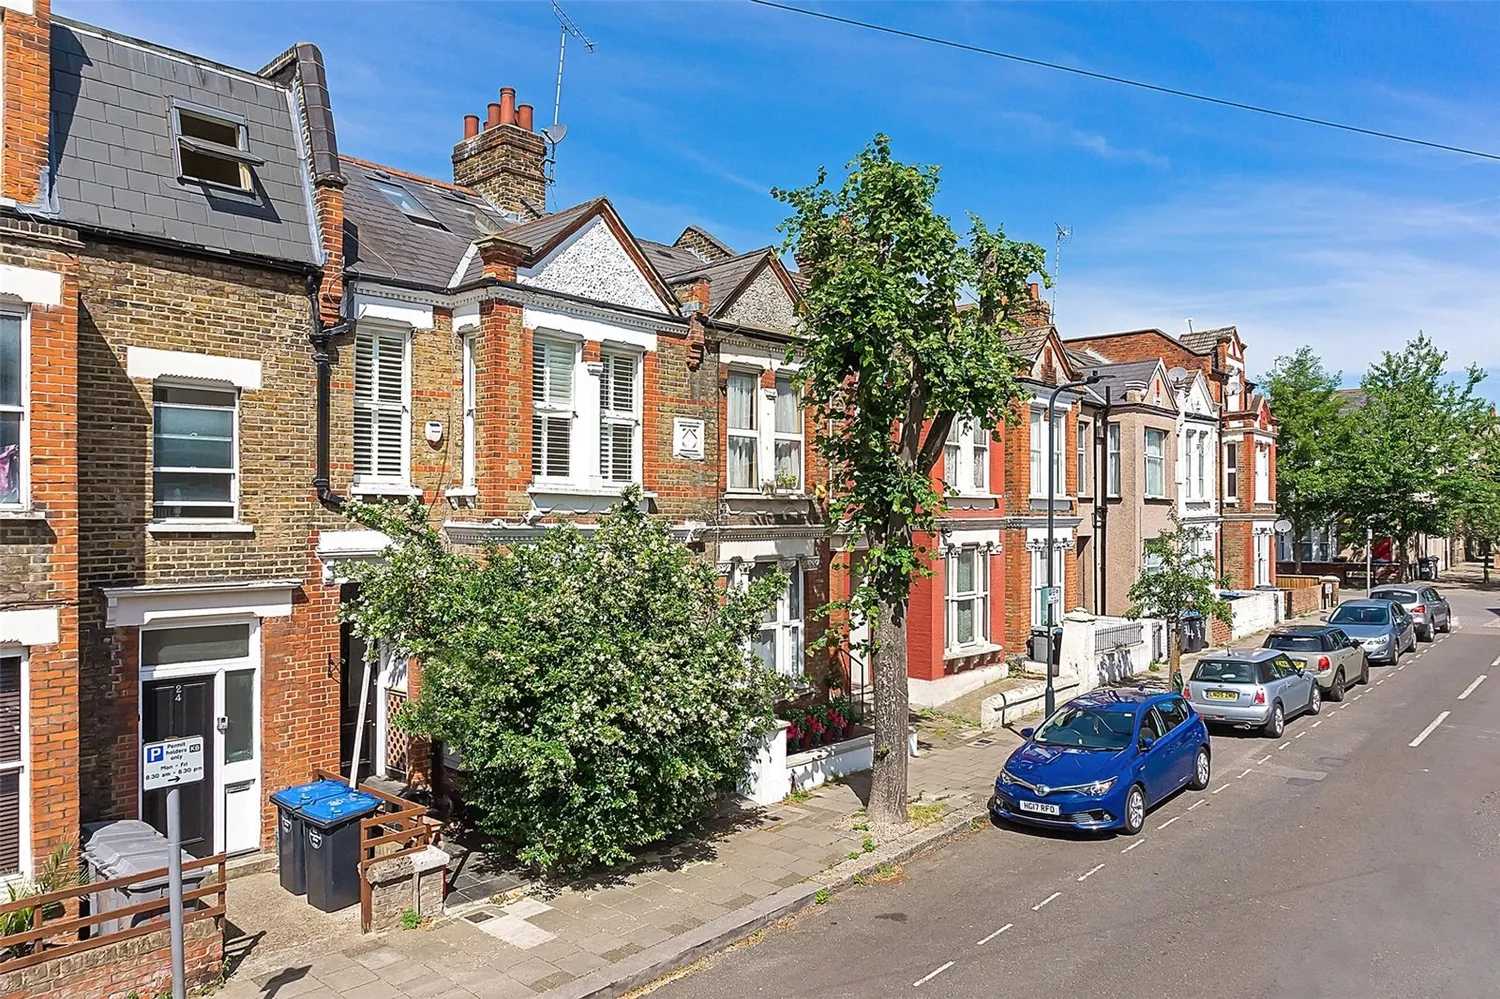 House in Cricklewood, Brent 11527000